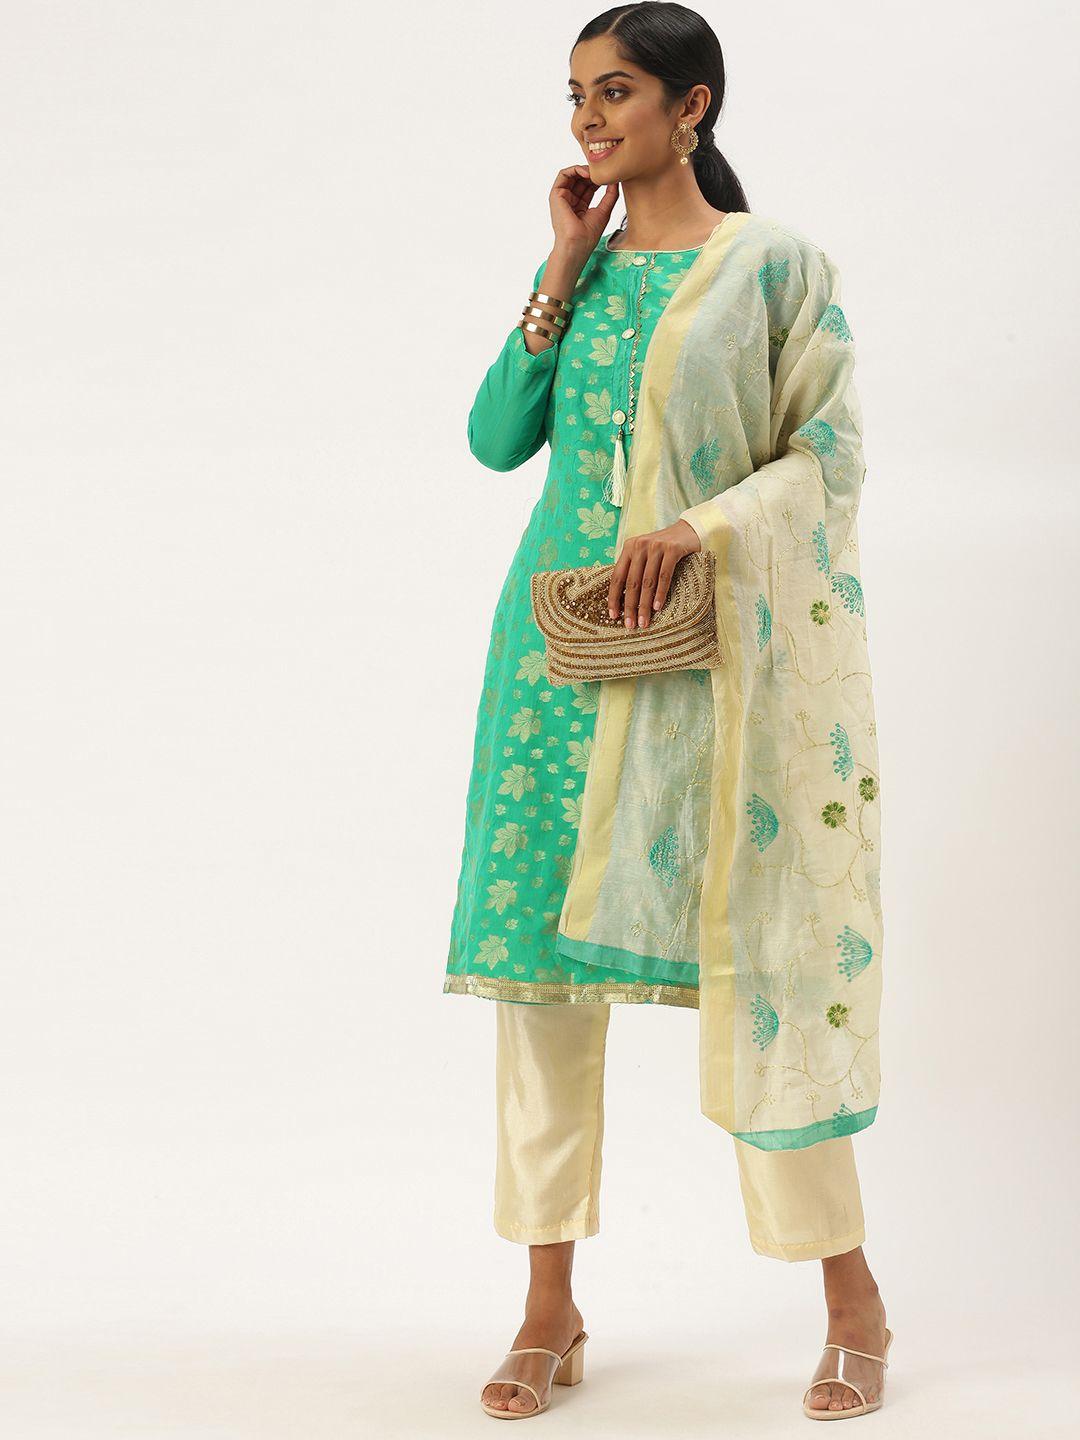 ladusaa sea green & gold-toned unstitched dress material